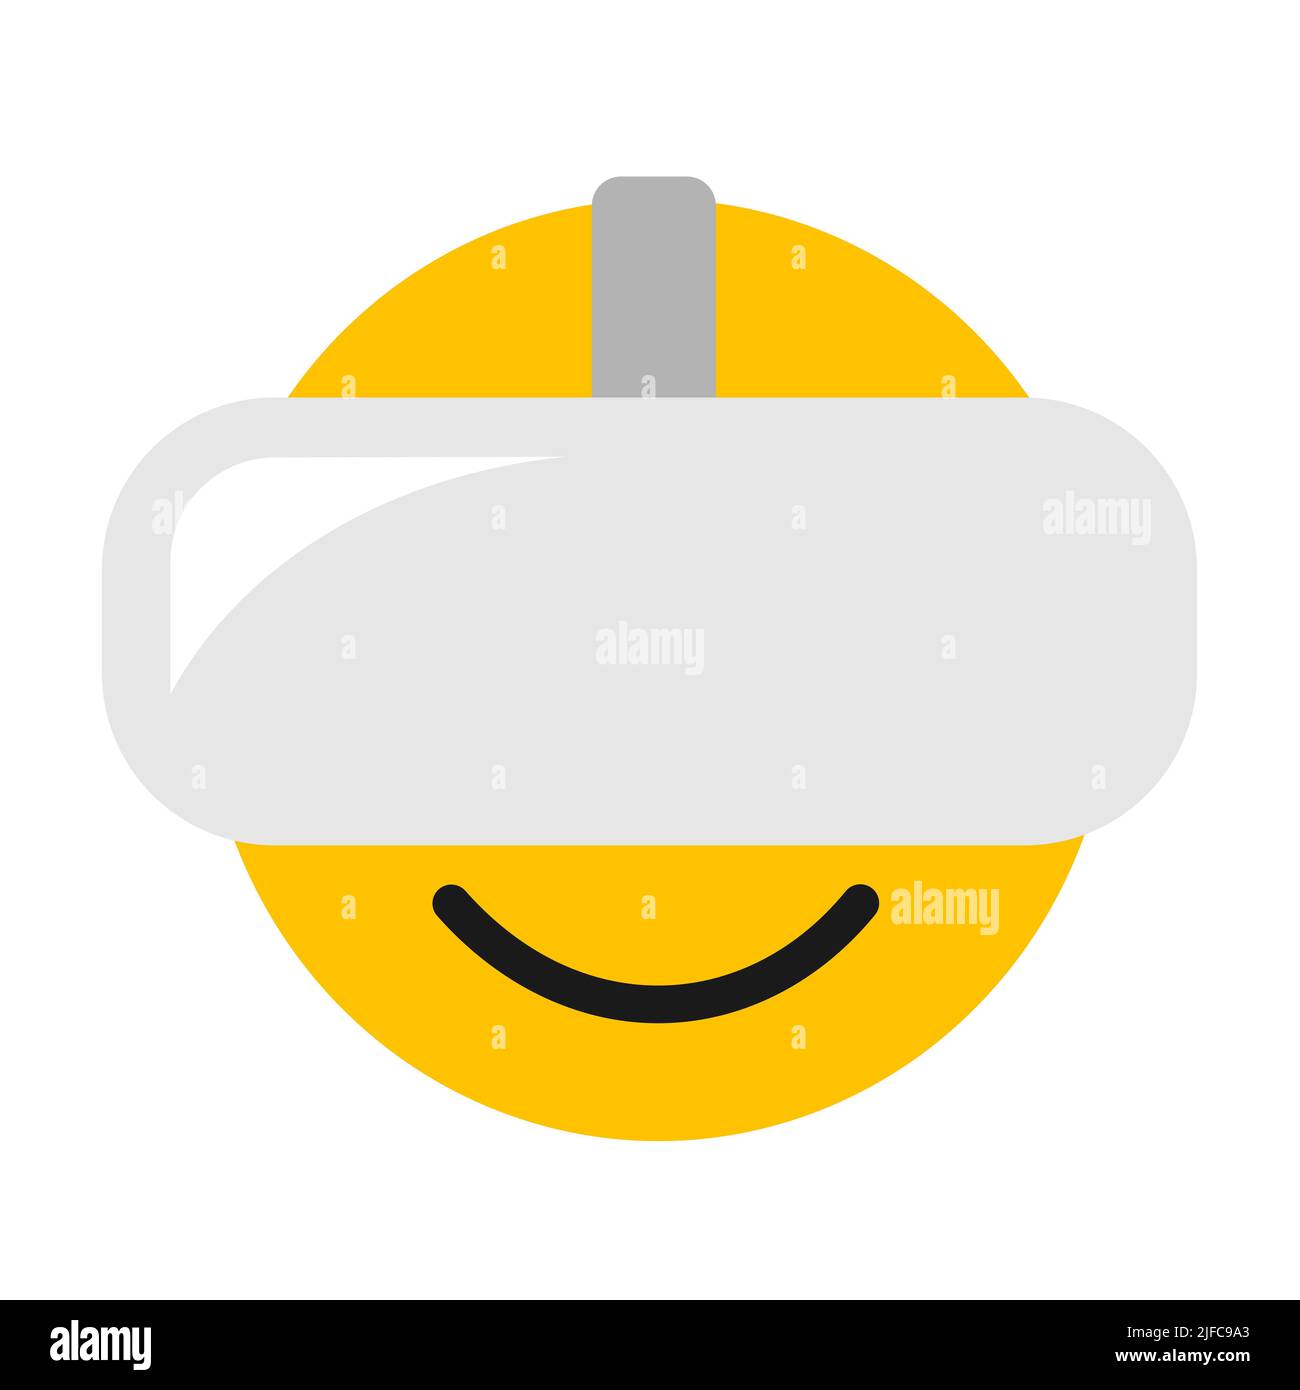 Virtual reality headset - emoji and emoticon of person using modern technology. Vector illustration isolated on white. Stock Photo